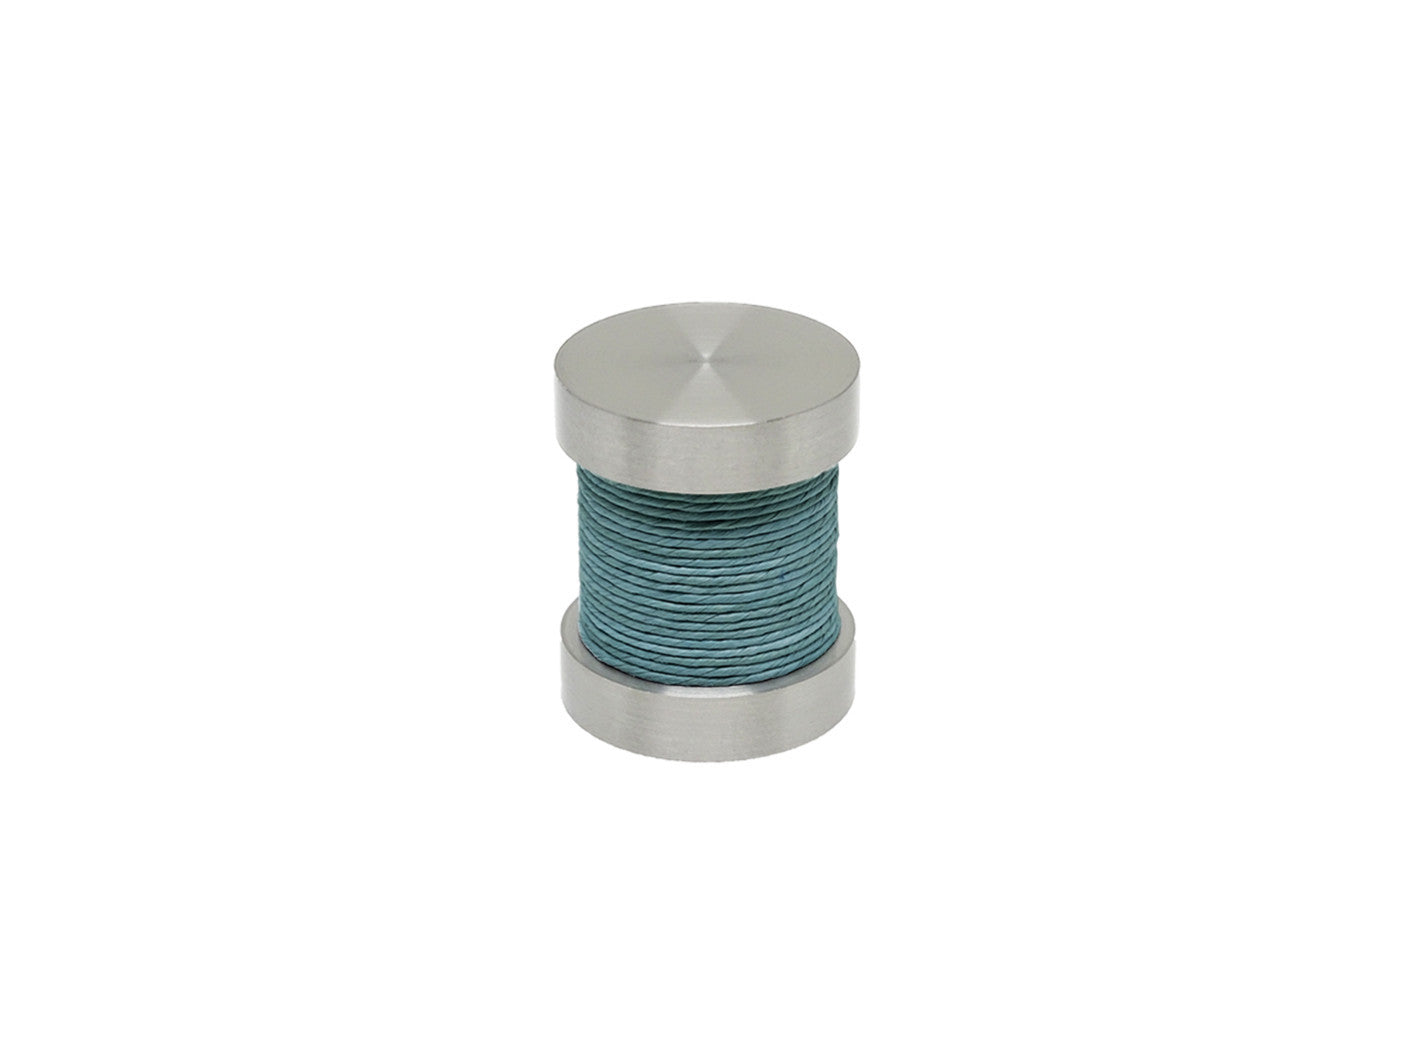 Sea Grass blue coloured twine groove finial | Walcot House 30mm stainless steel collection